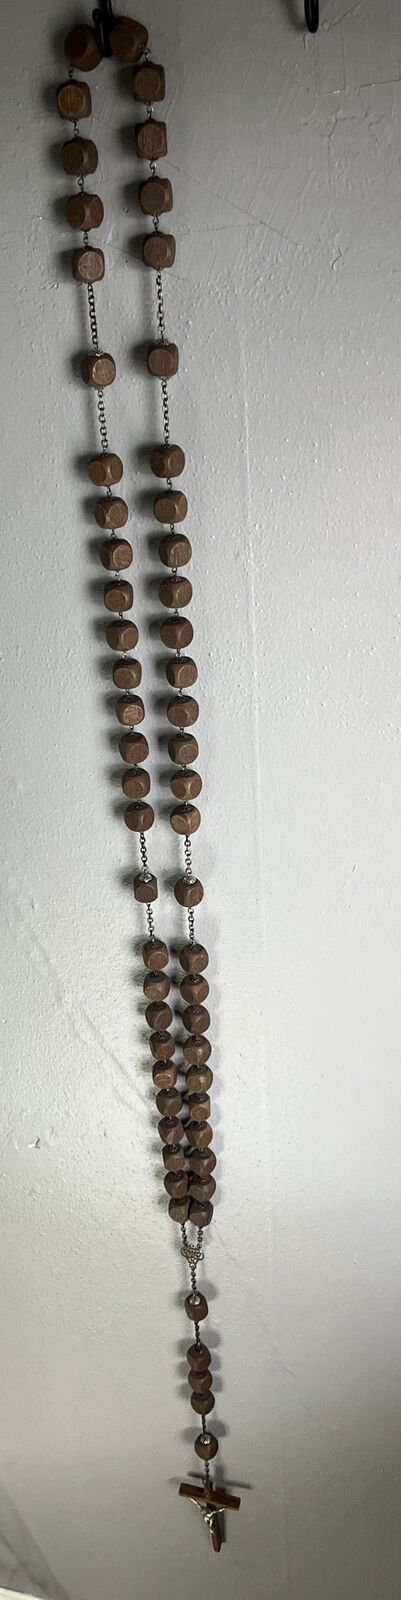 ROSARY - 57” Wooden Wall Rosary -INRI Inscribed -Beautifully Done & Vintage